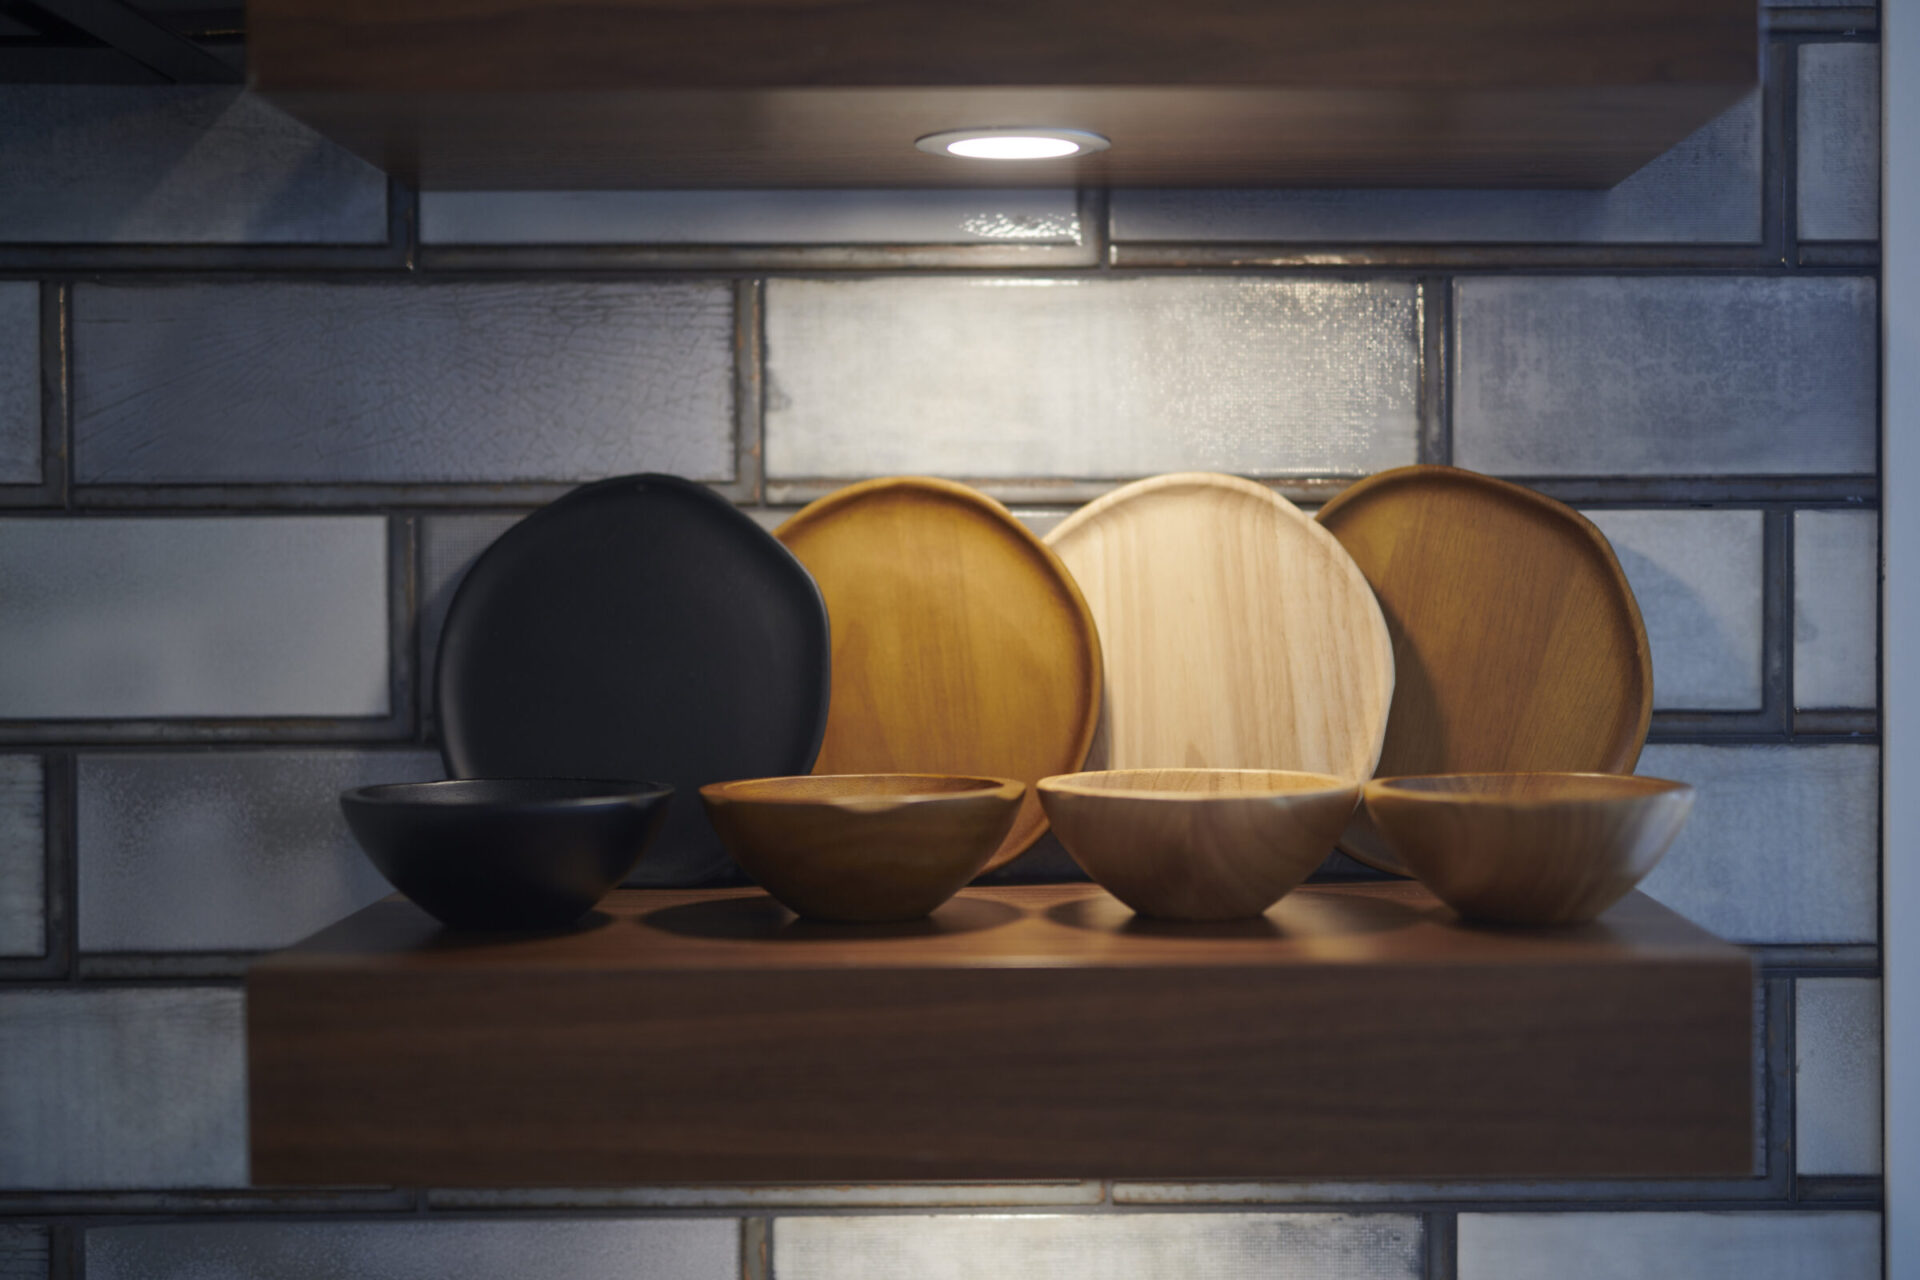 A wooden shelf holds various plates and bowls against a blue-tiled backdrop with a warm, illuminated ambiance from a small shelf light.